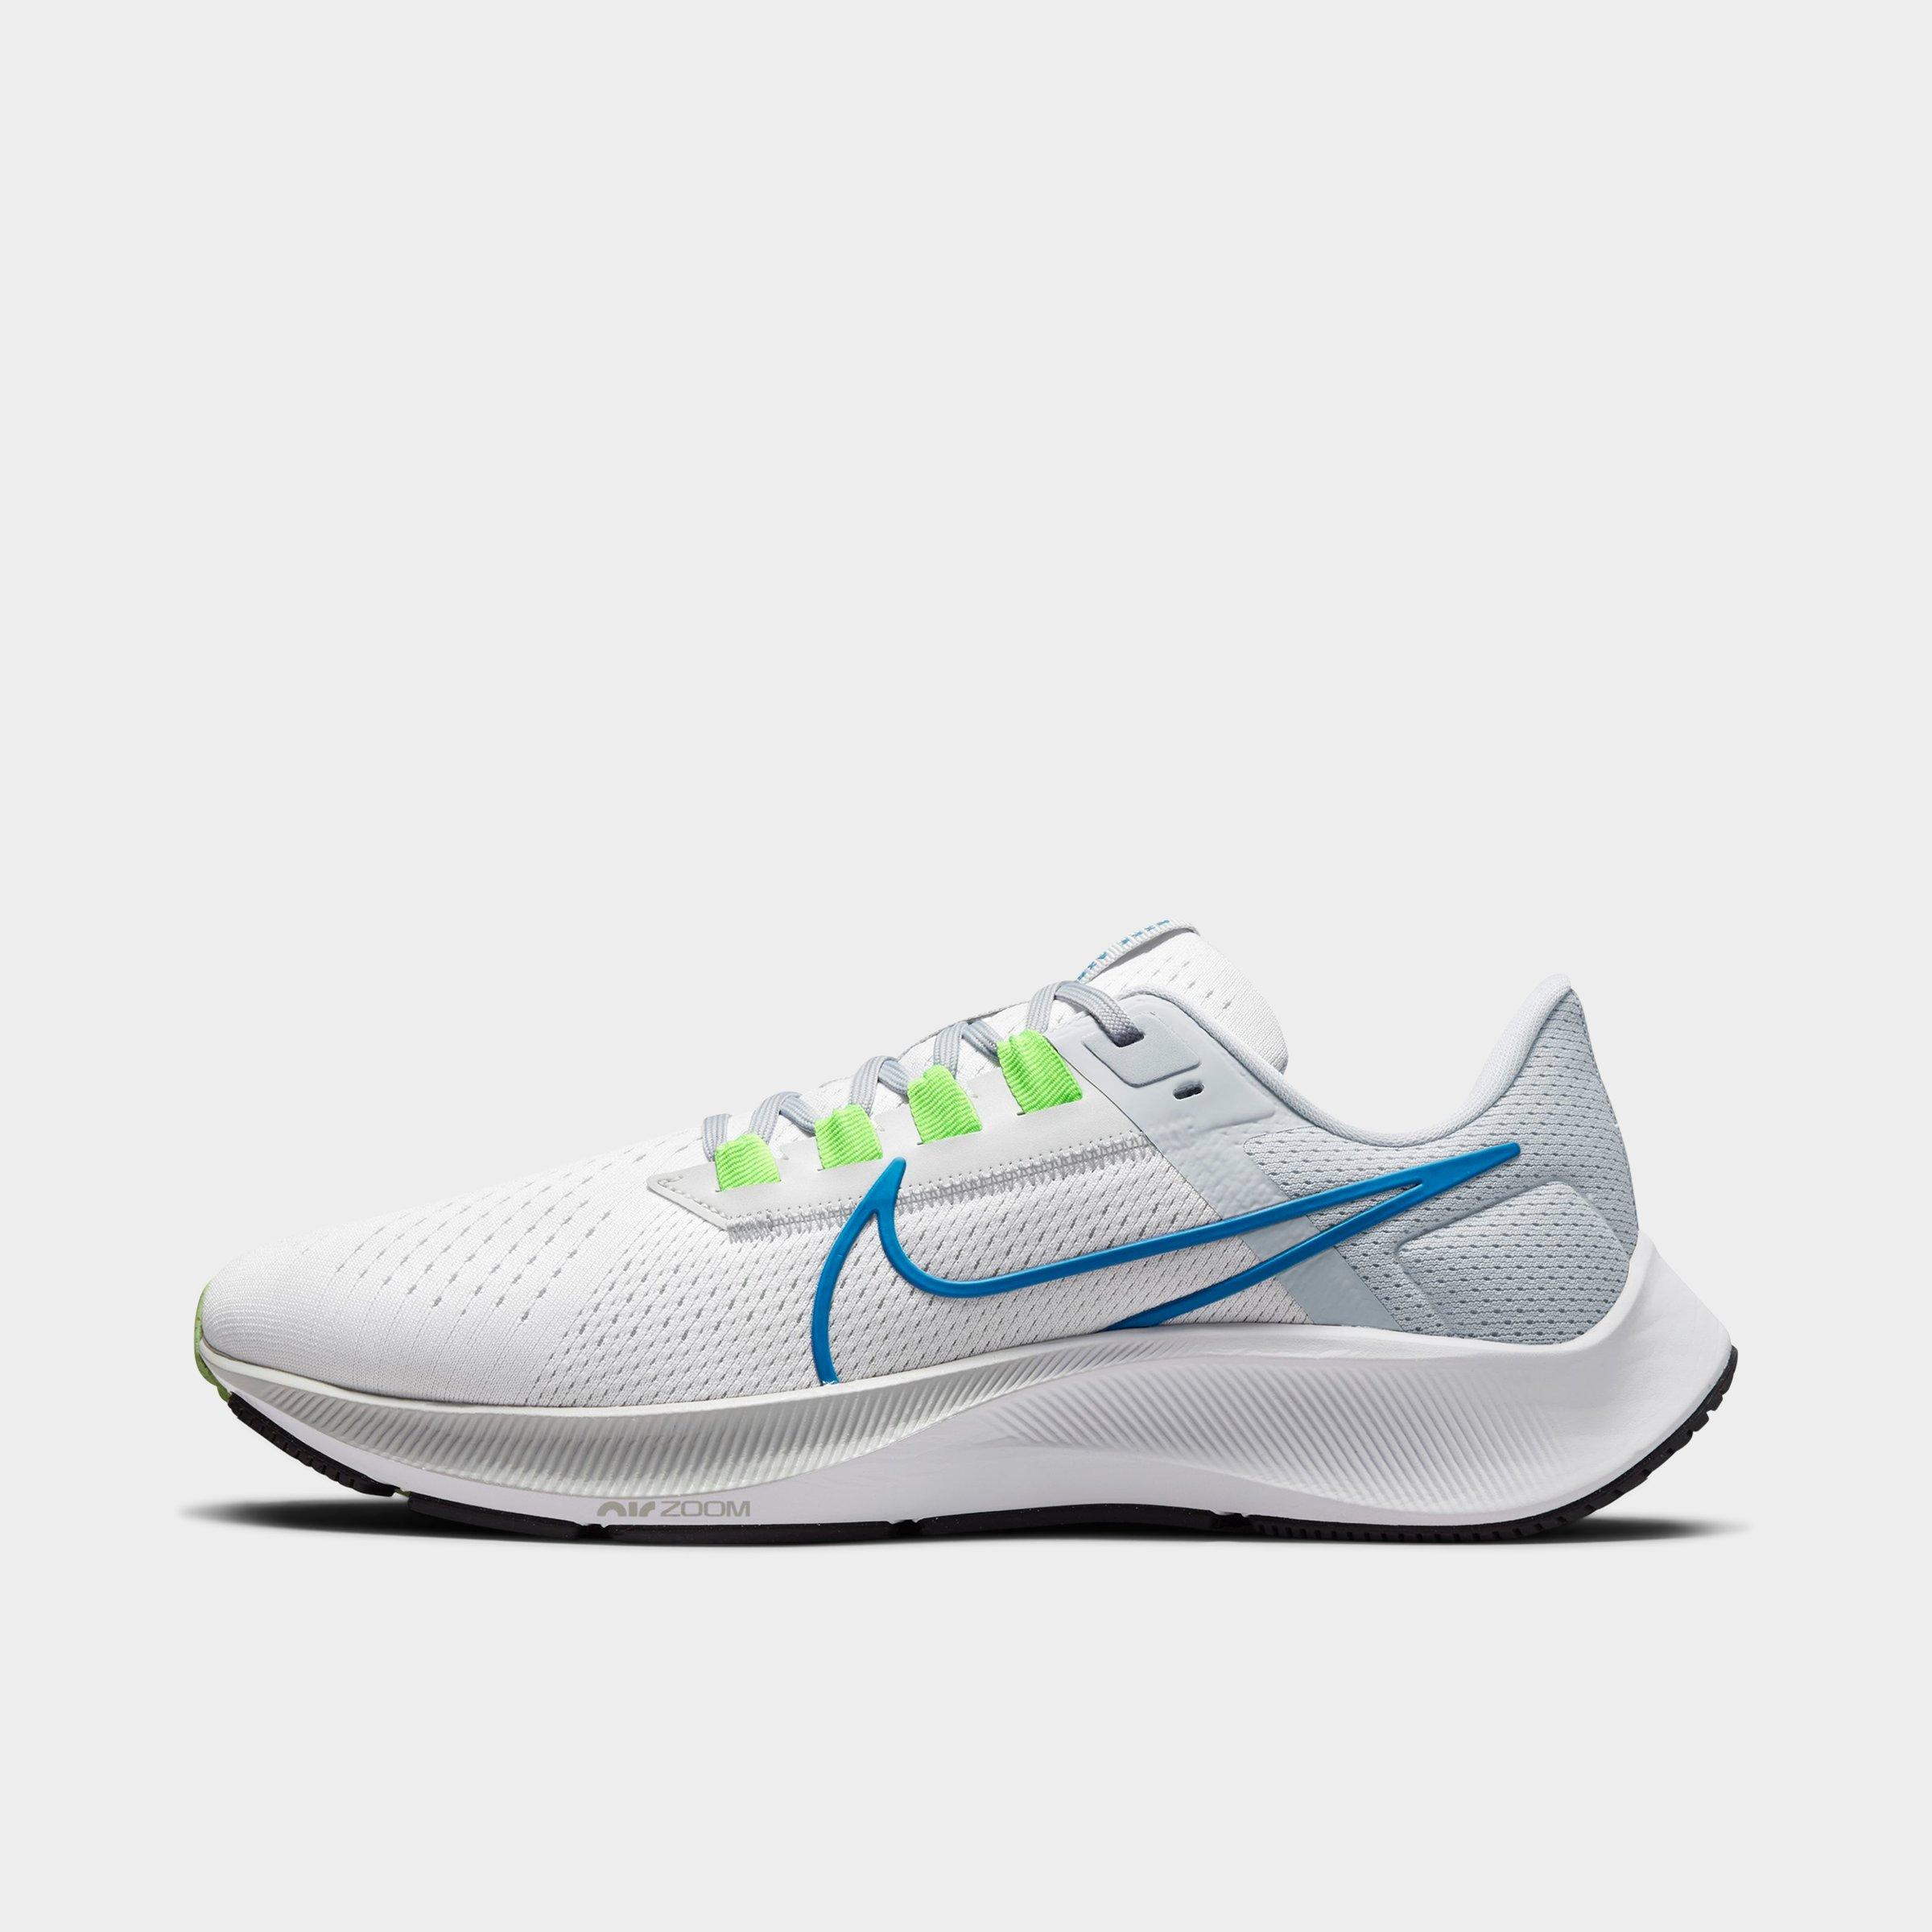 Nike Men's Air Zoom Pegasus 38 Running Shoes In White/imperial Blue/pure Platinum/wolf Grey/lime Blast/black